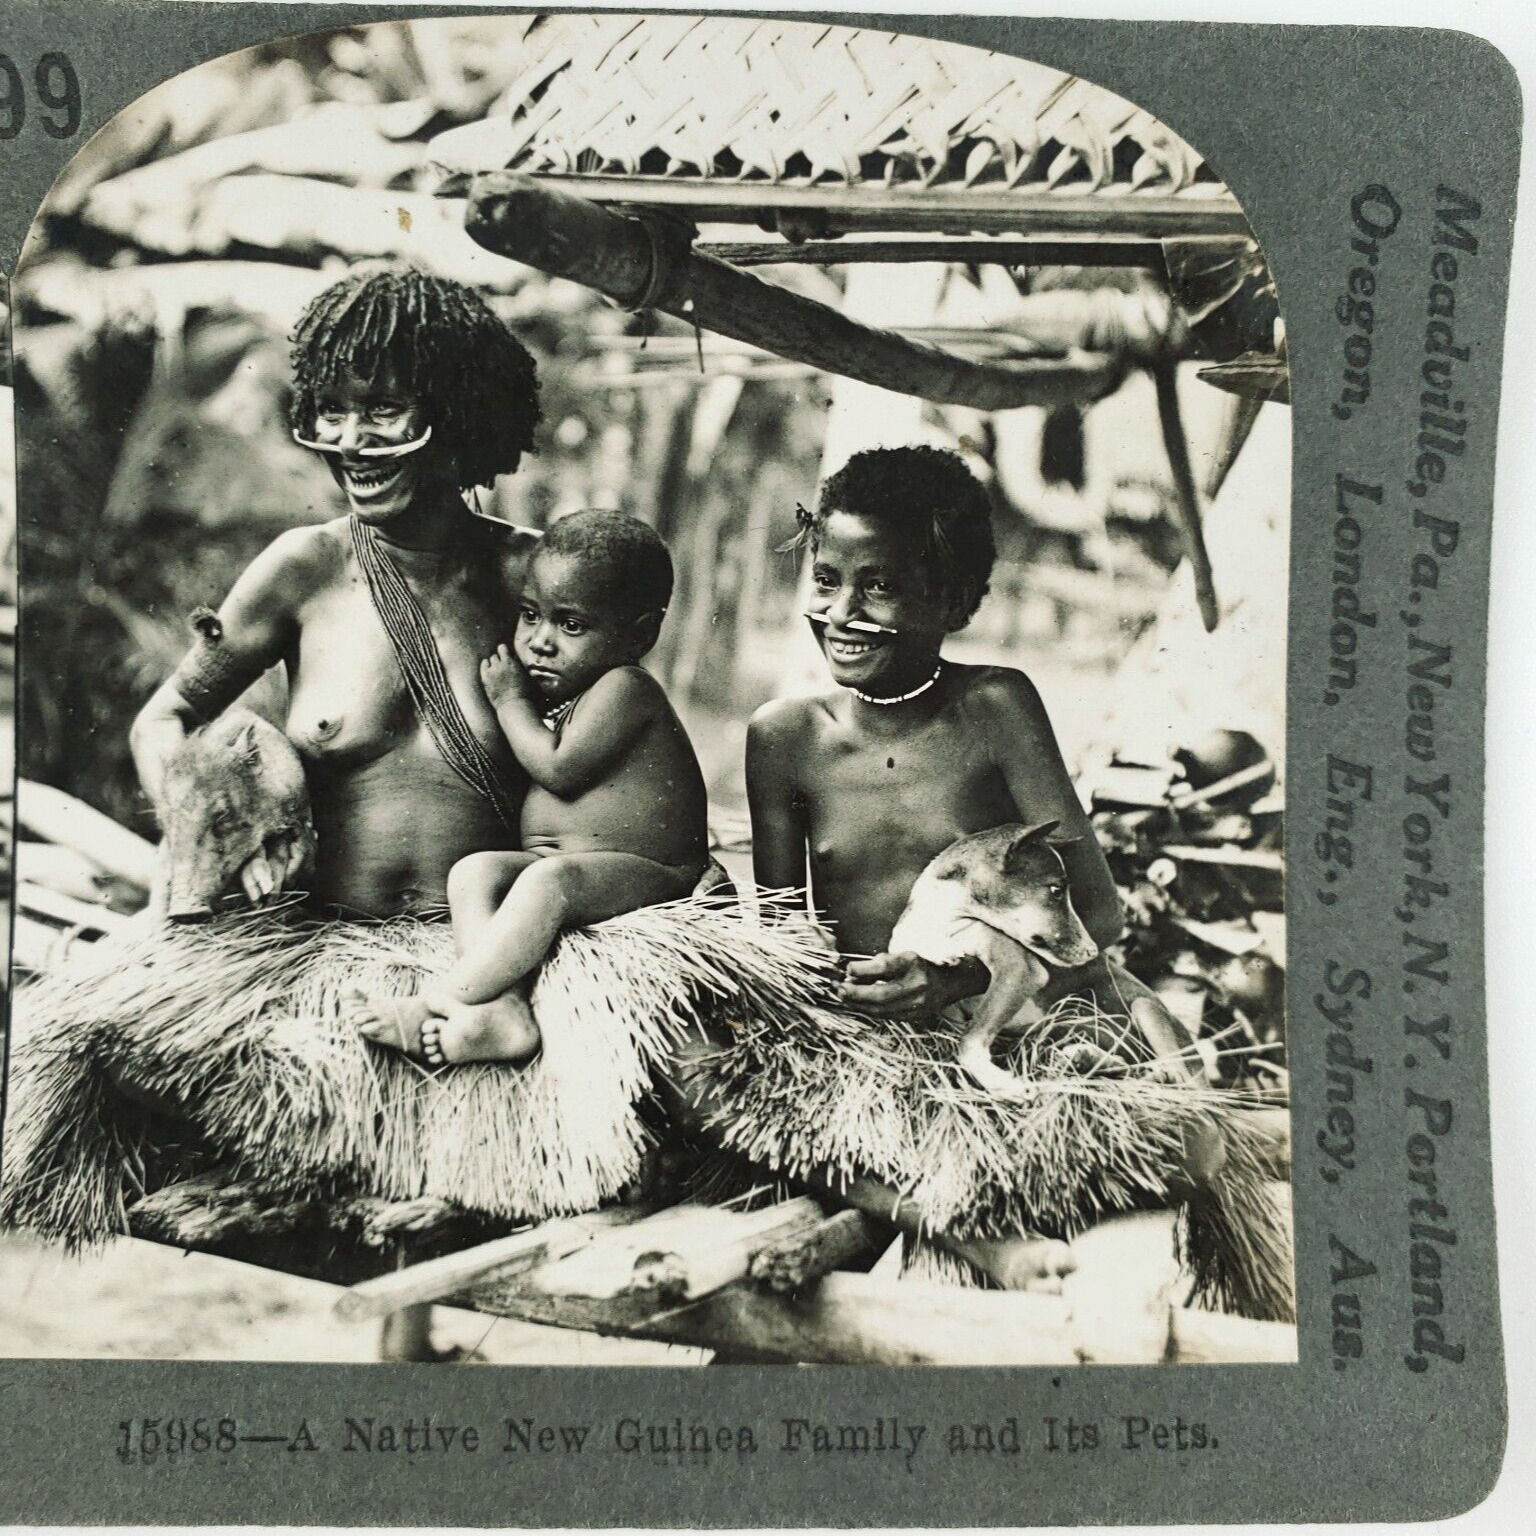 Indigenous New Guinea Family Stereoview 1920s Native People Pig Hut Woman E861